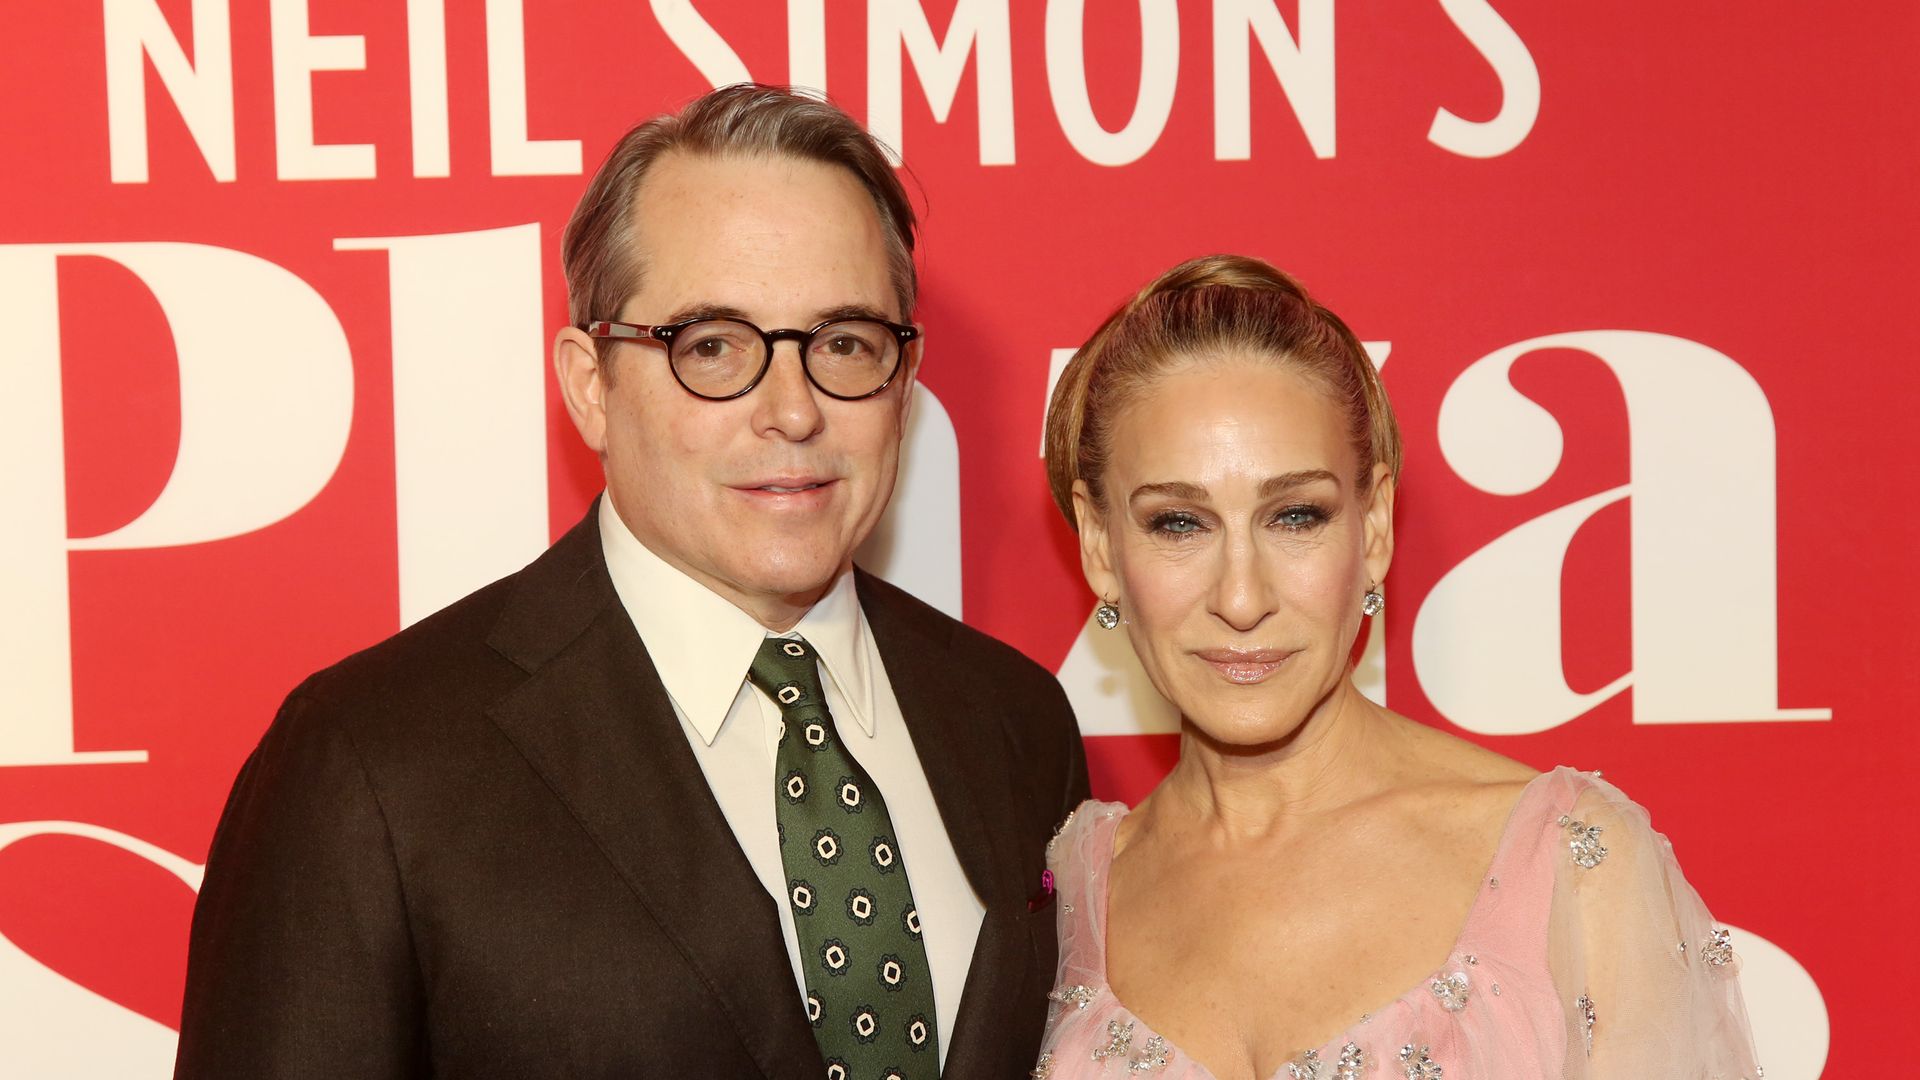 Matthew Broderick and Sarah Jessica Parker pose at the opening night of the Neil Simon play "Plaza Suite" on Broadway at The Hudson Theater on March 28, 2022 in New York City